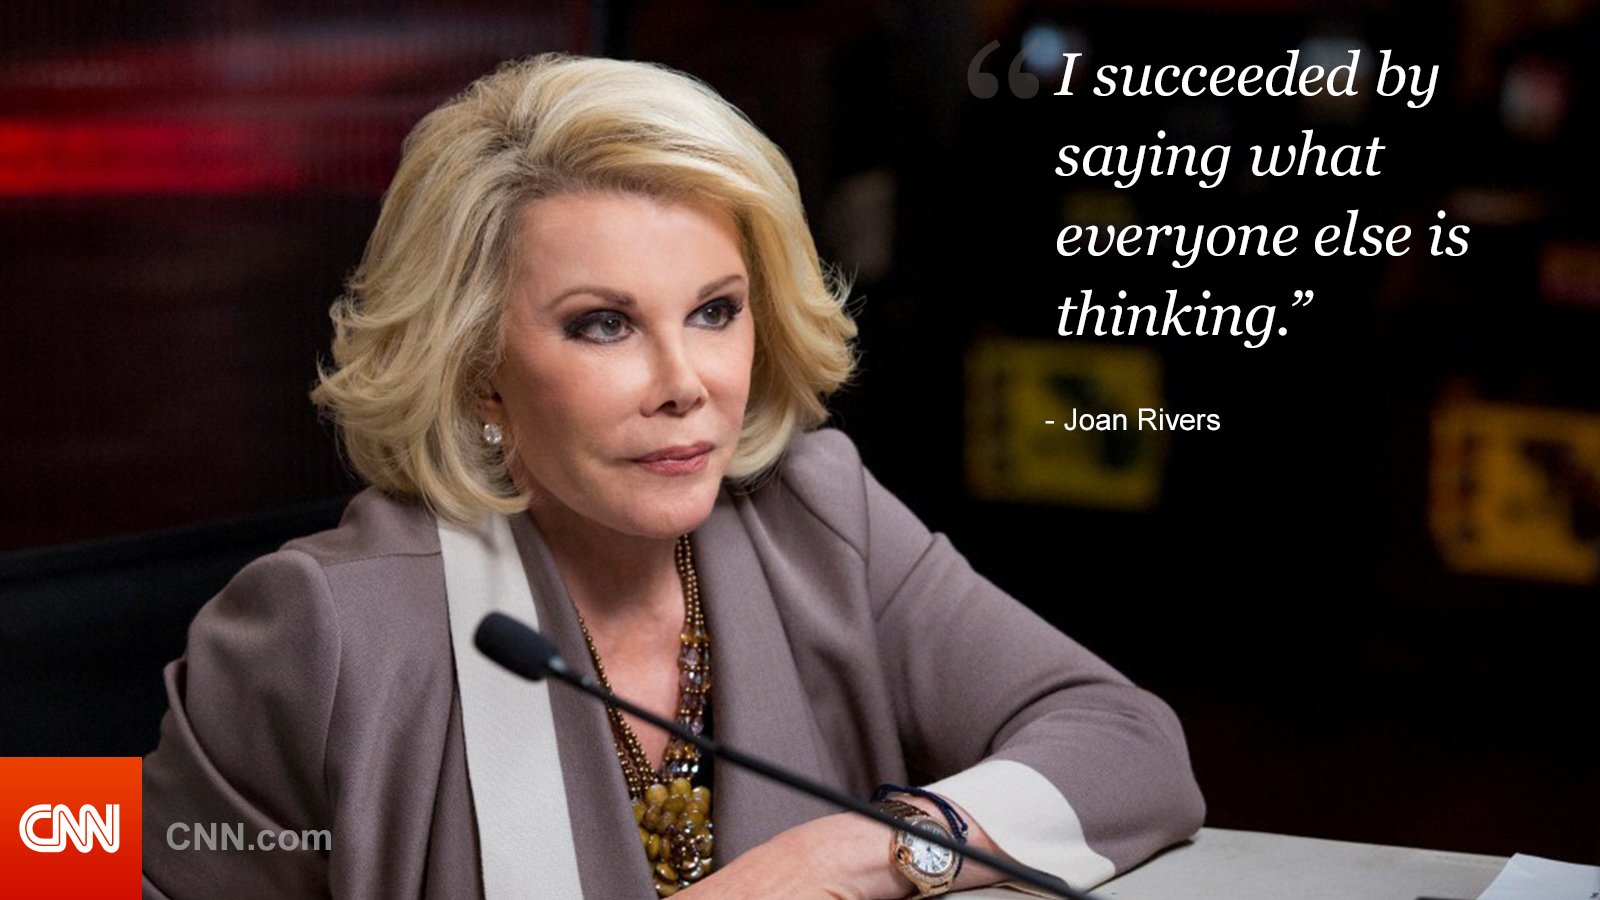 Comedian Joan Rivers died in a New York hospital Thursday afternoon, a week after suffering cardiac arrest during a medical procedure, her daughter said.